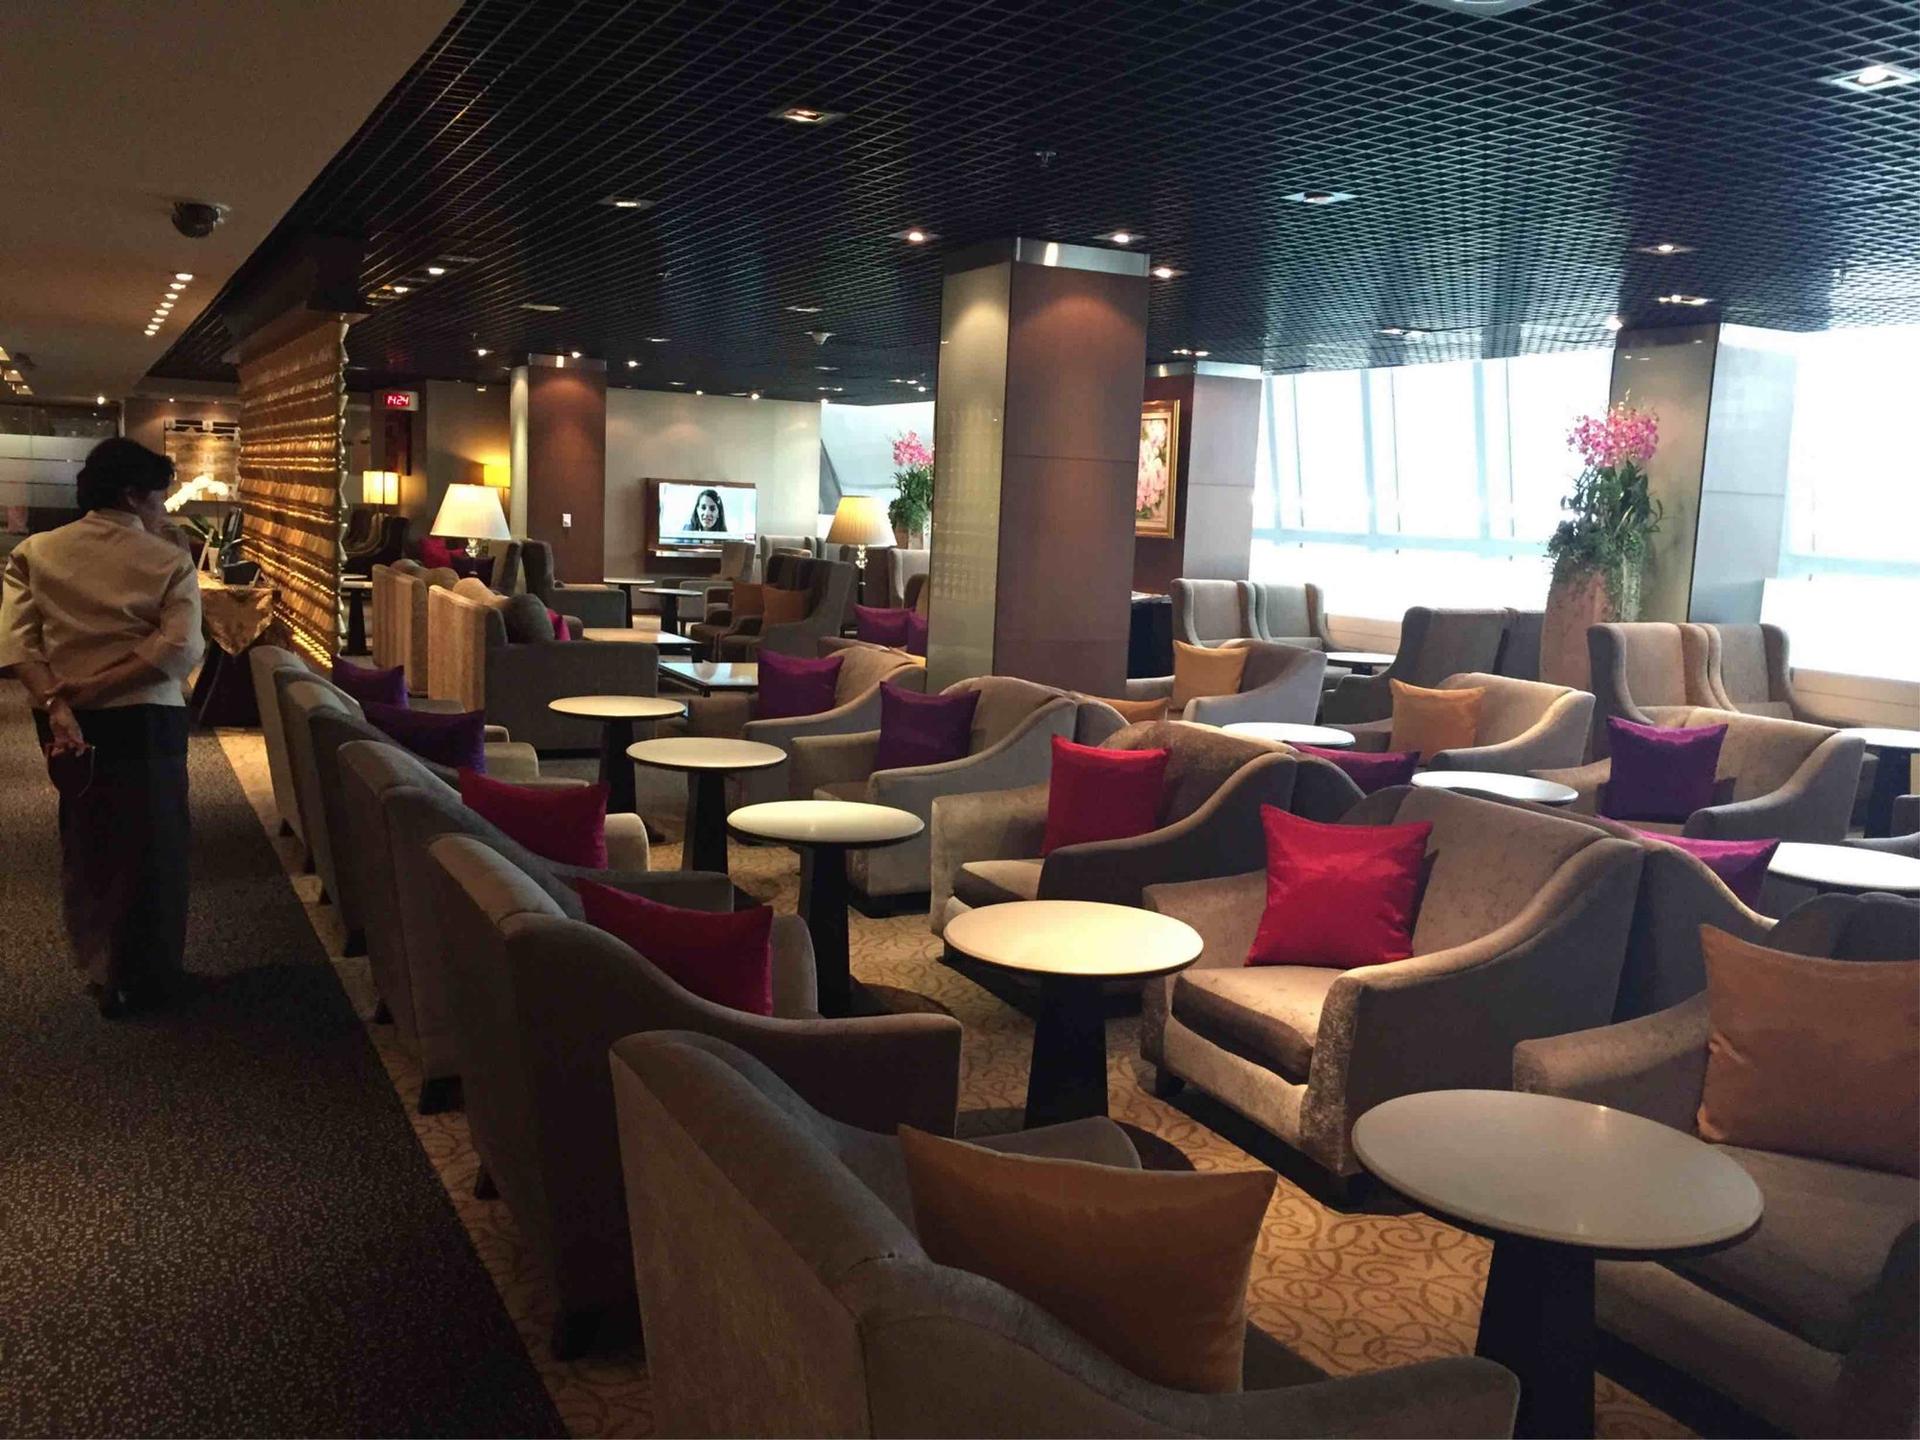 Thai Airways Royal First Class Lounge image 26 of 44